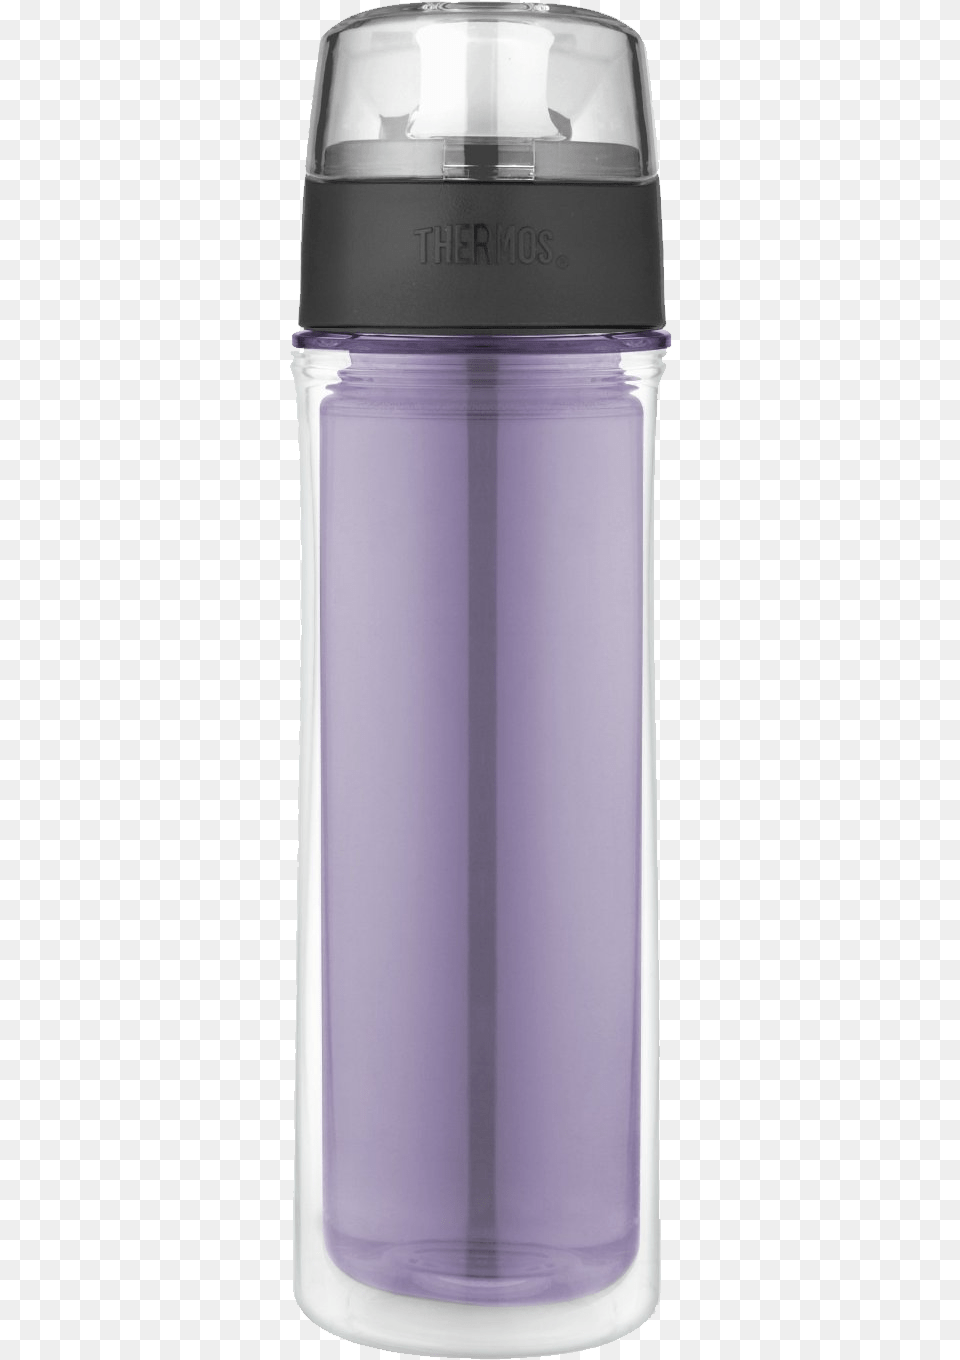 Thermos Double Wall Hydration Water Bottle Tritan 18oz Sports Water Bottle Transparent, Jar, Water Bottle, Can, Tin Free Png